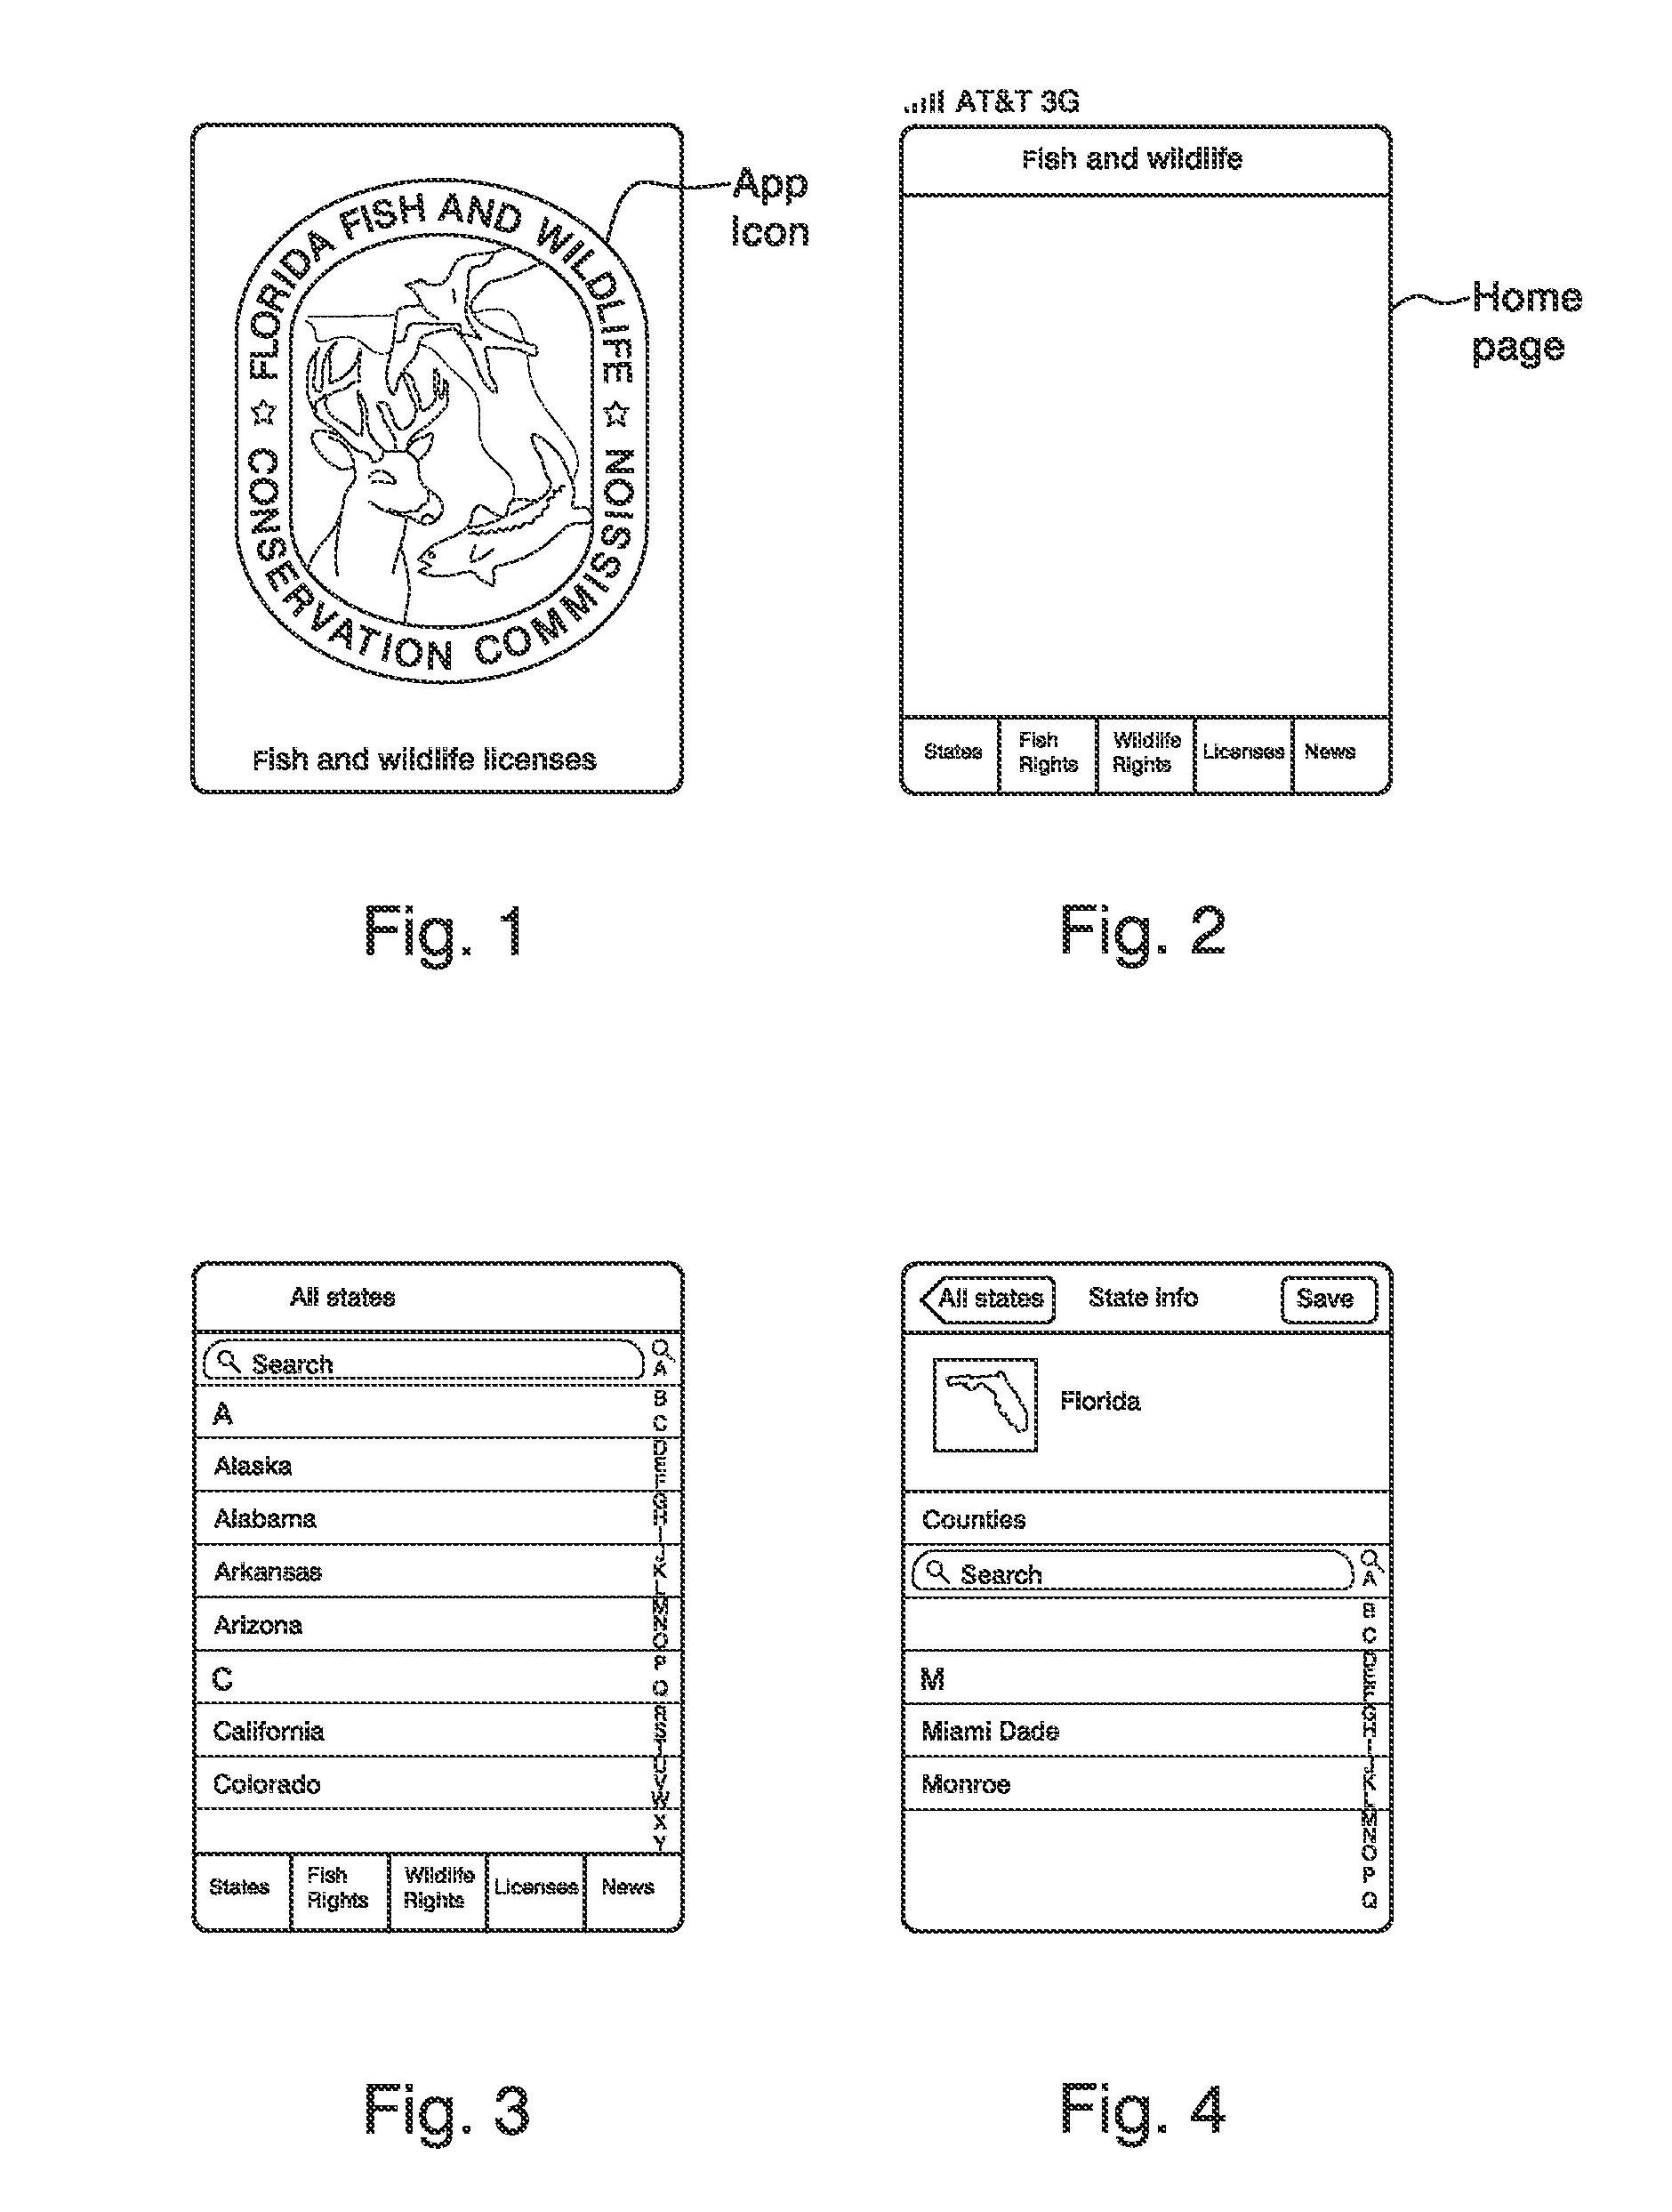 Smartphone-implemented method of obtaining a fishing or hunting license